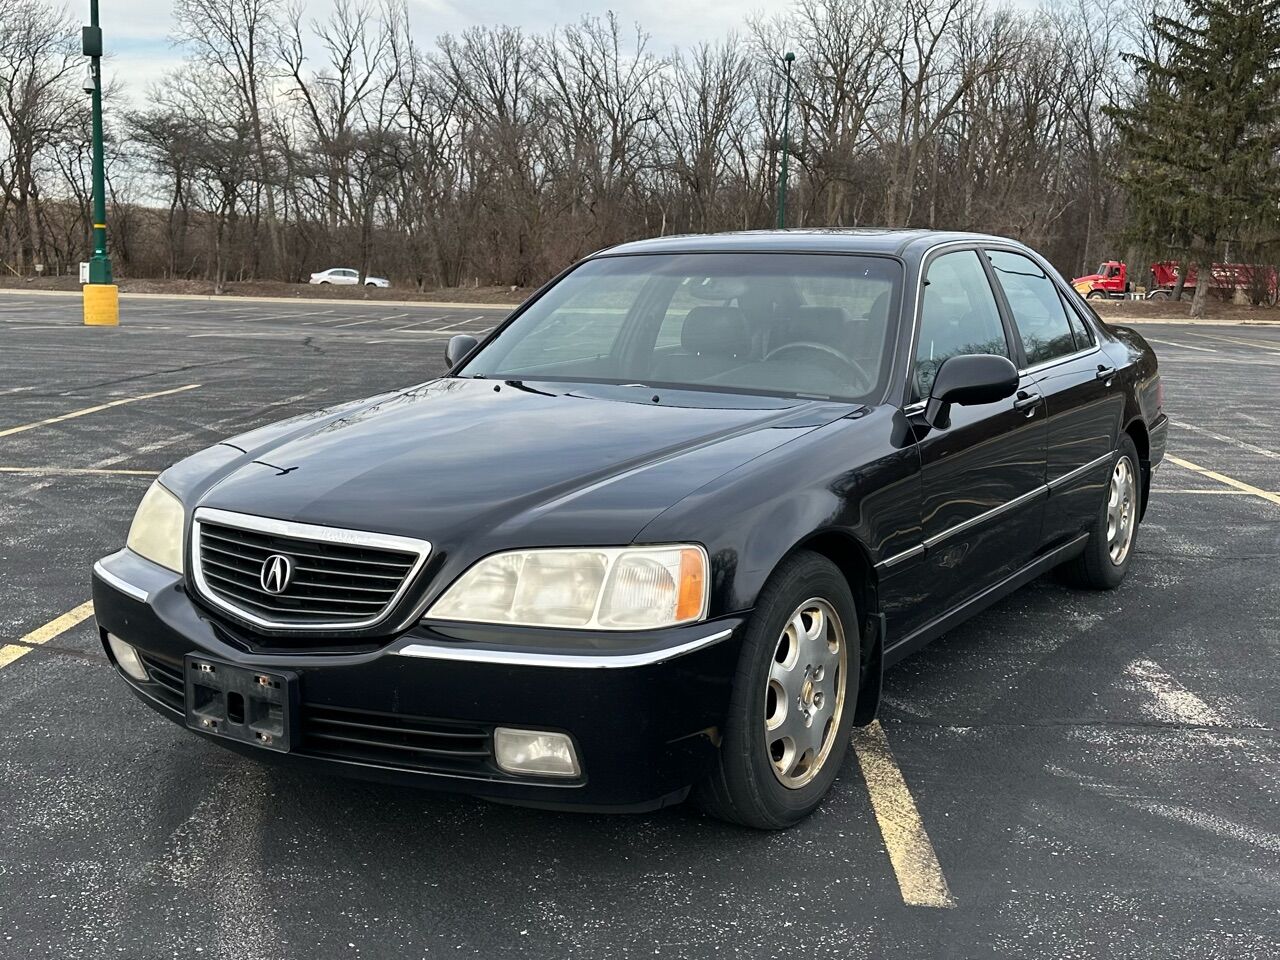 2000 Acura RL For Sale In Bronx, NY - Carsforsale.com®